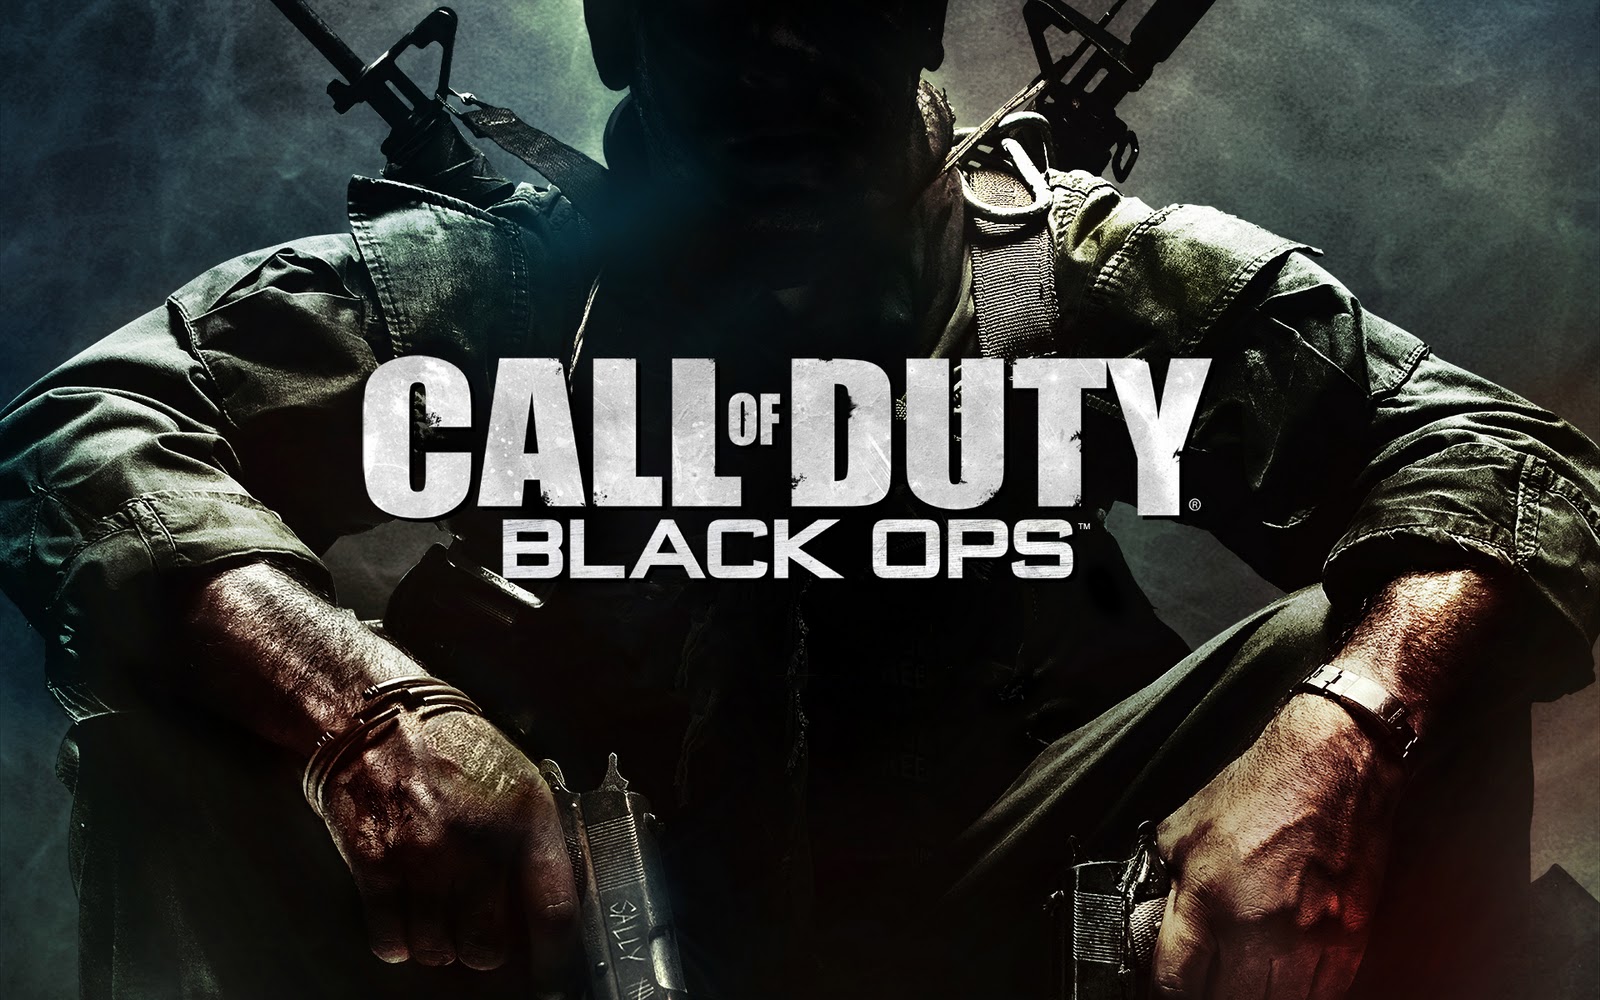 Crtica   Call of Duty Black Ops